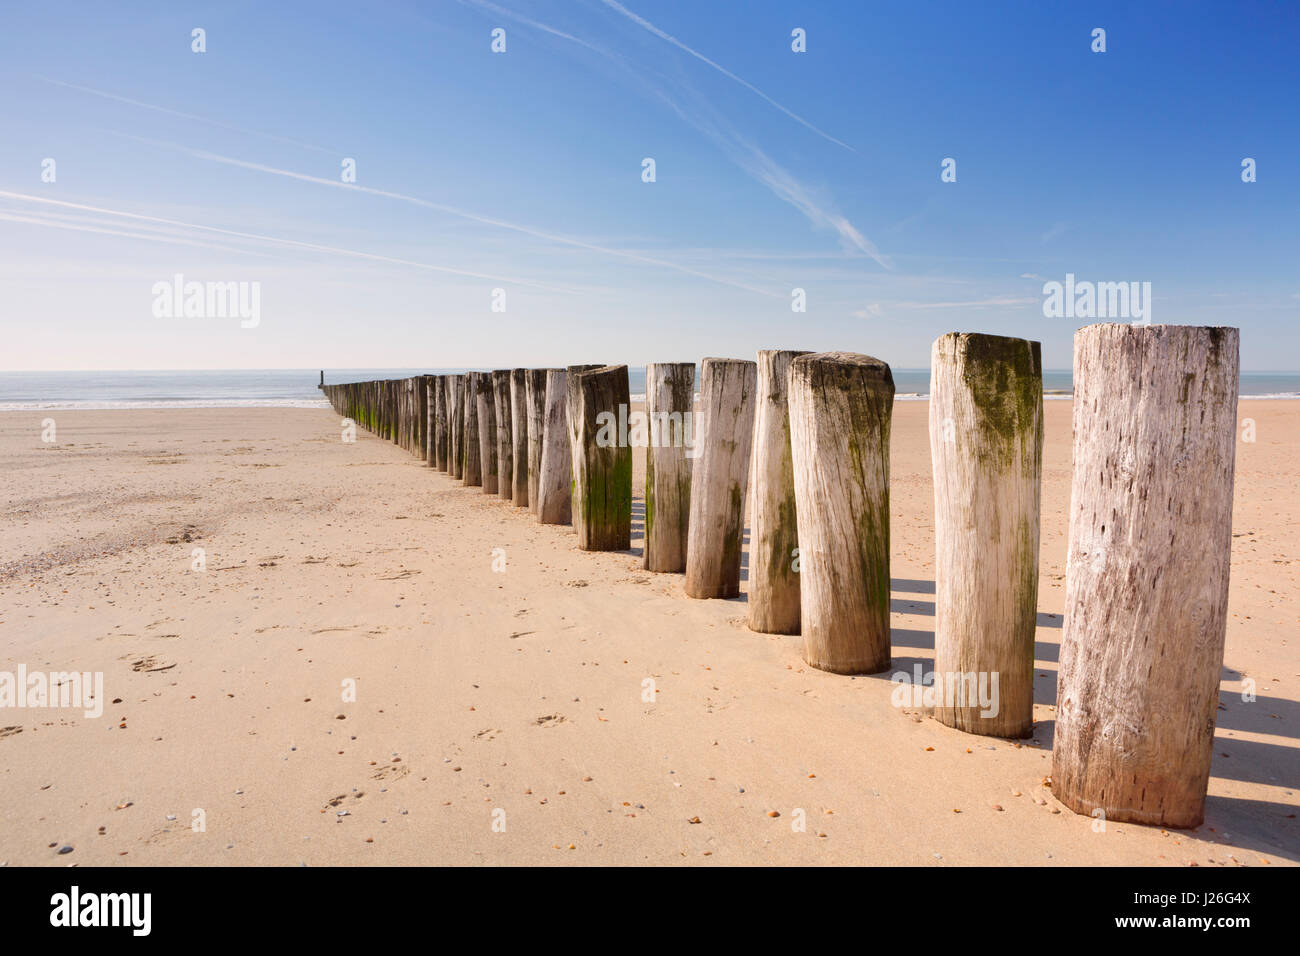 A wooden groyne on the beach at Dishoek in Zeeland, The Netherlands. Stock Photo